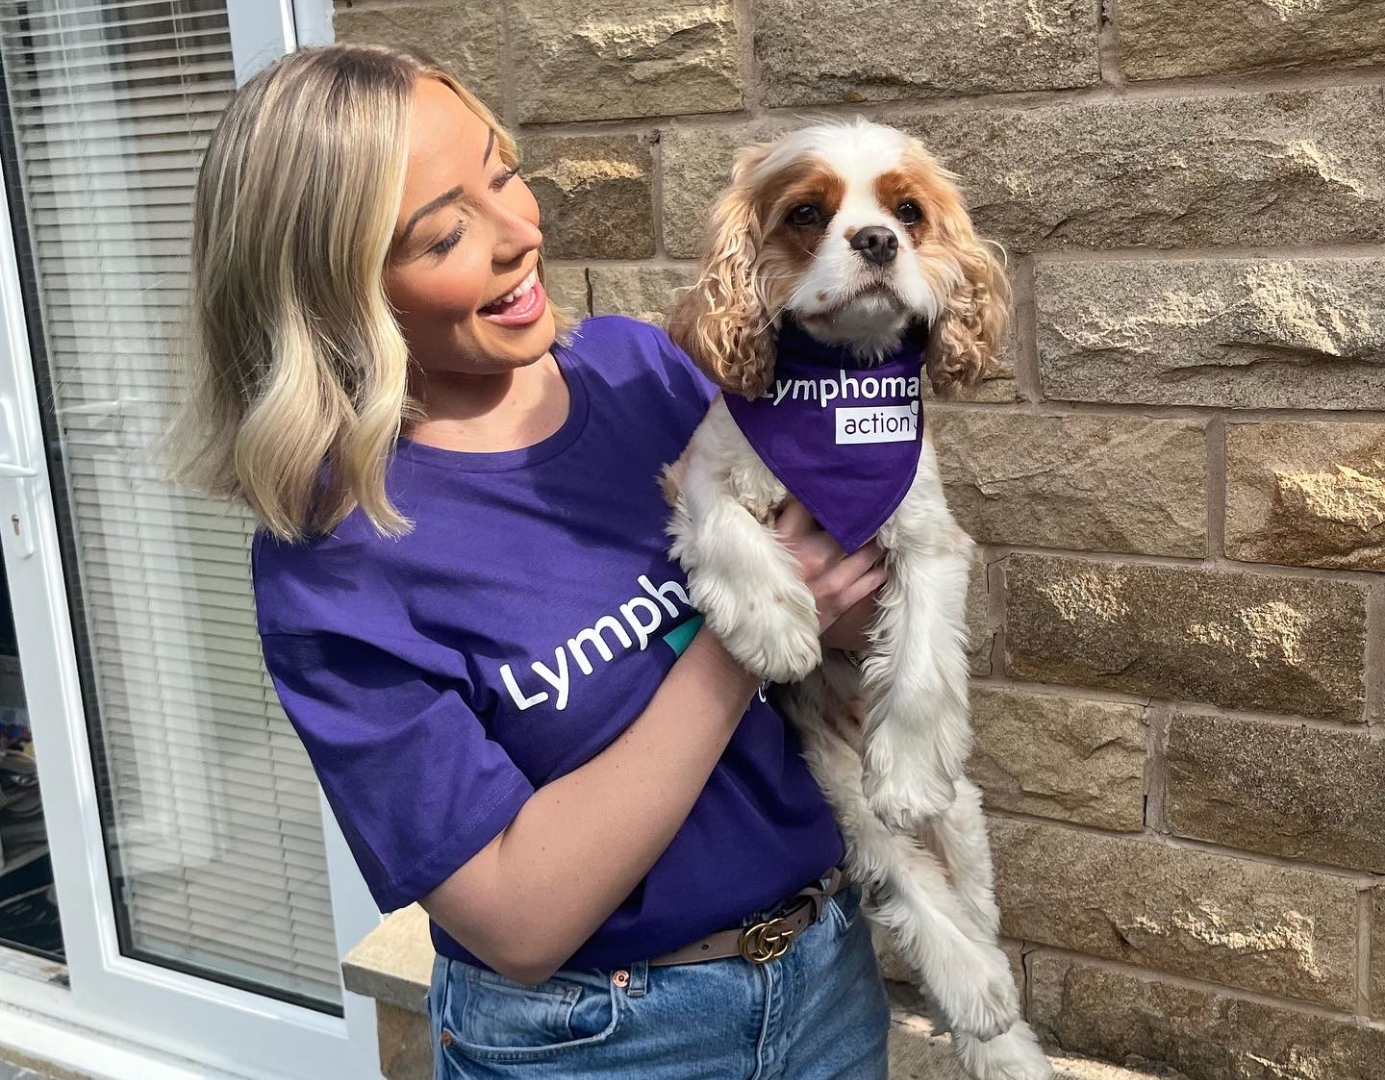 Lymphoma Action supporter with her dog